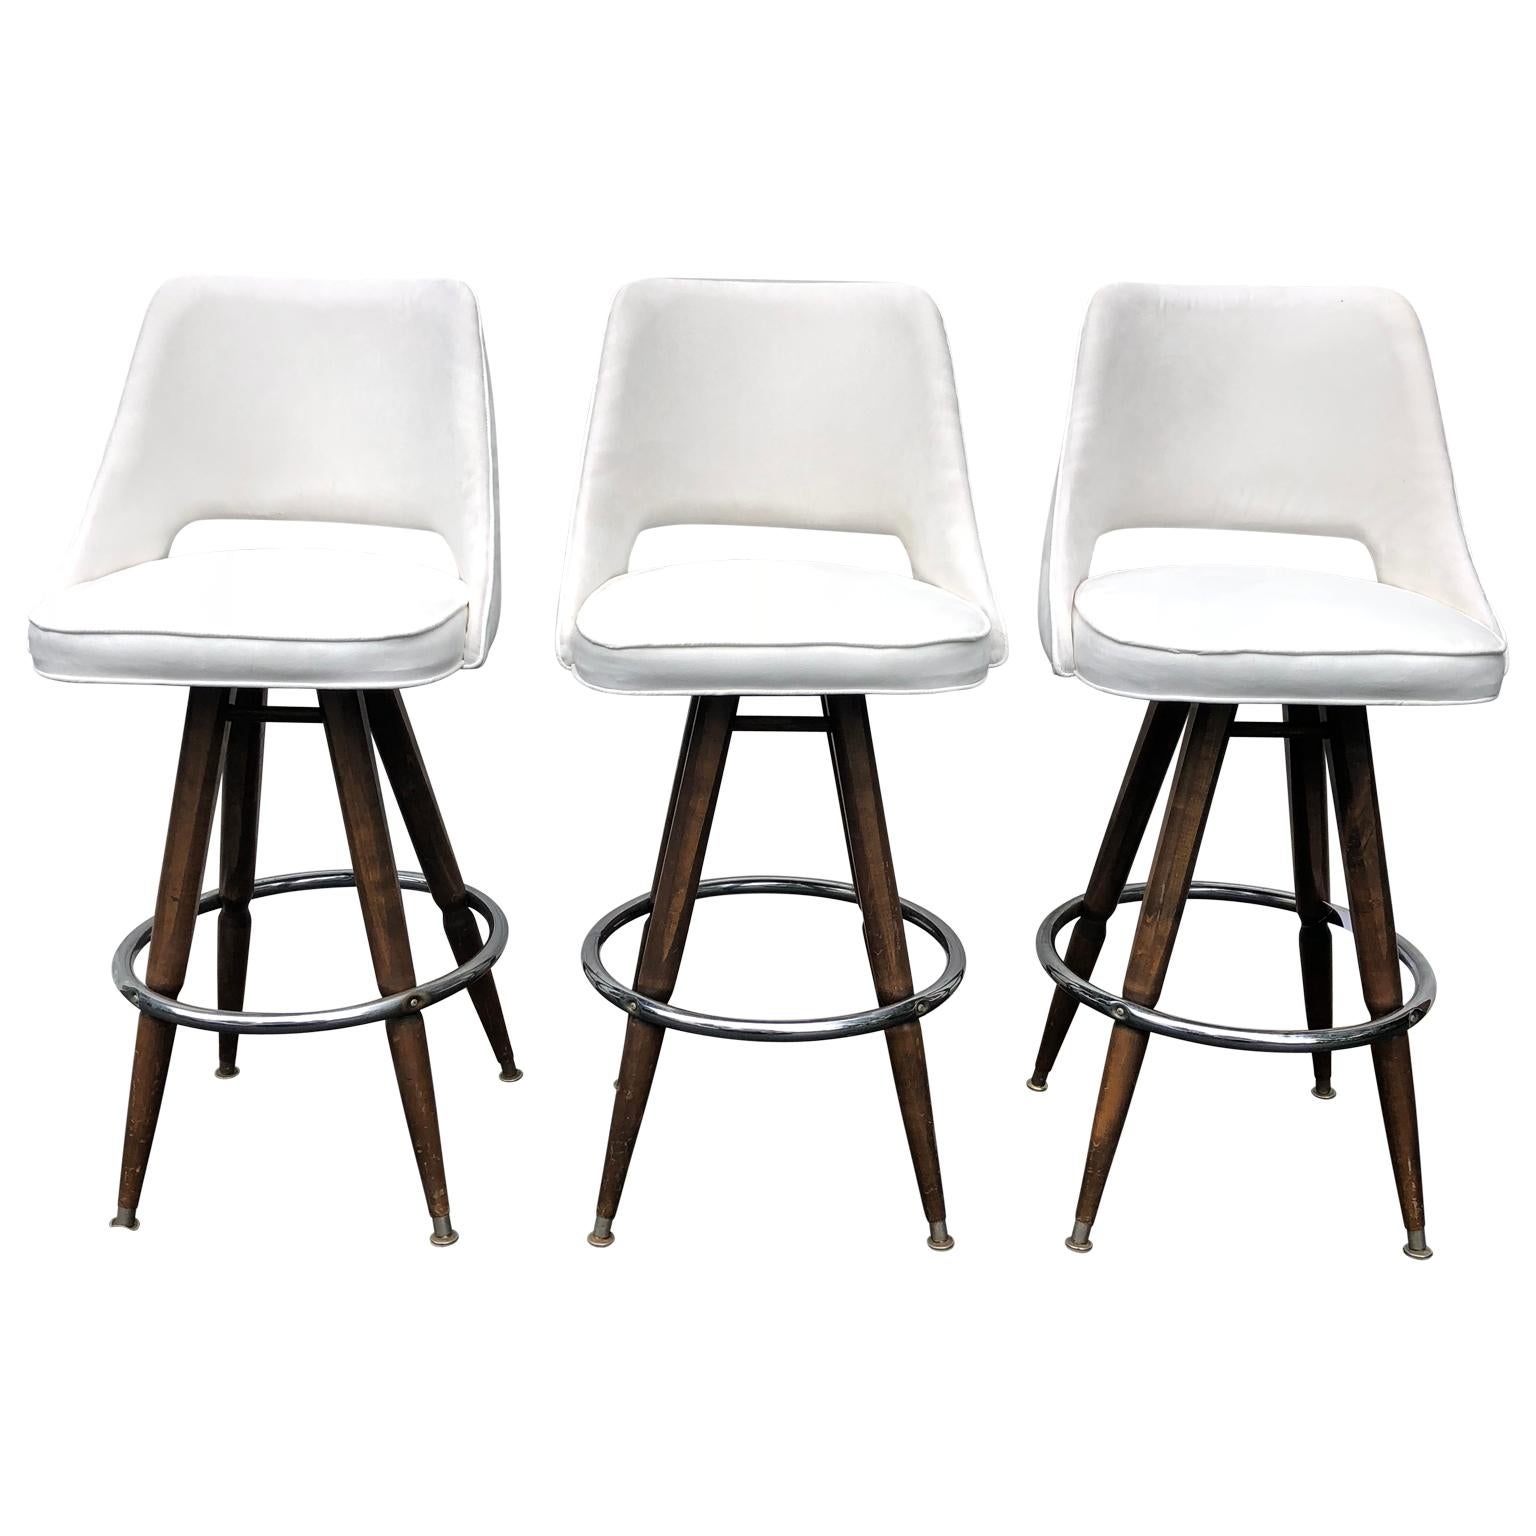 Set of Three Mid-Century White Faux-Suede Bar Stools

3 large sturdy bar stool on wooden and chrome legs. Newly upholstered in white spill-proof faux suede.